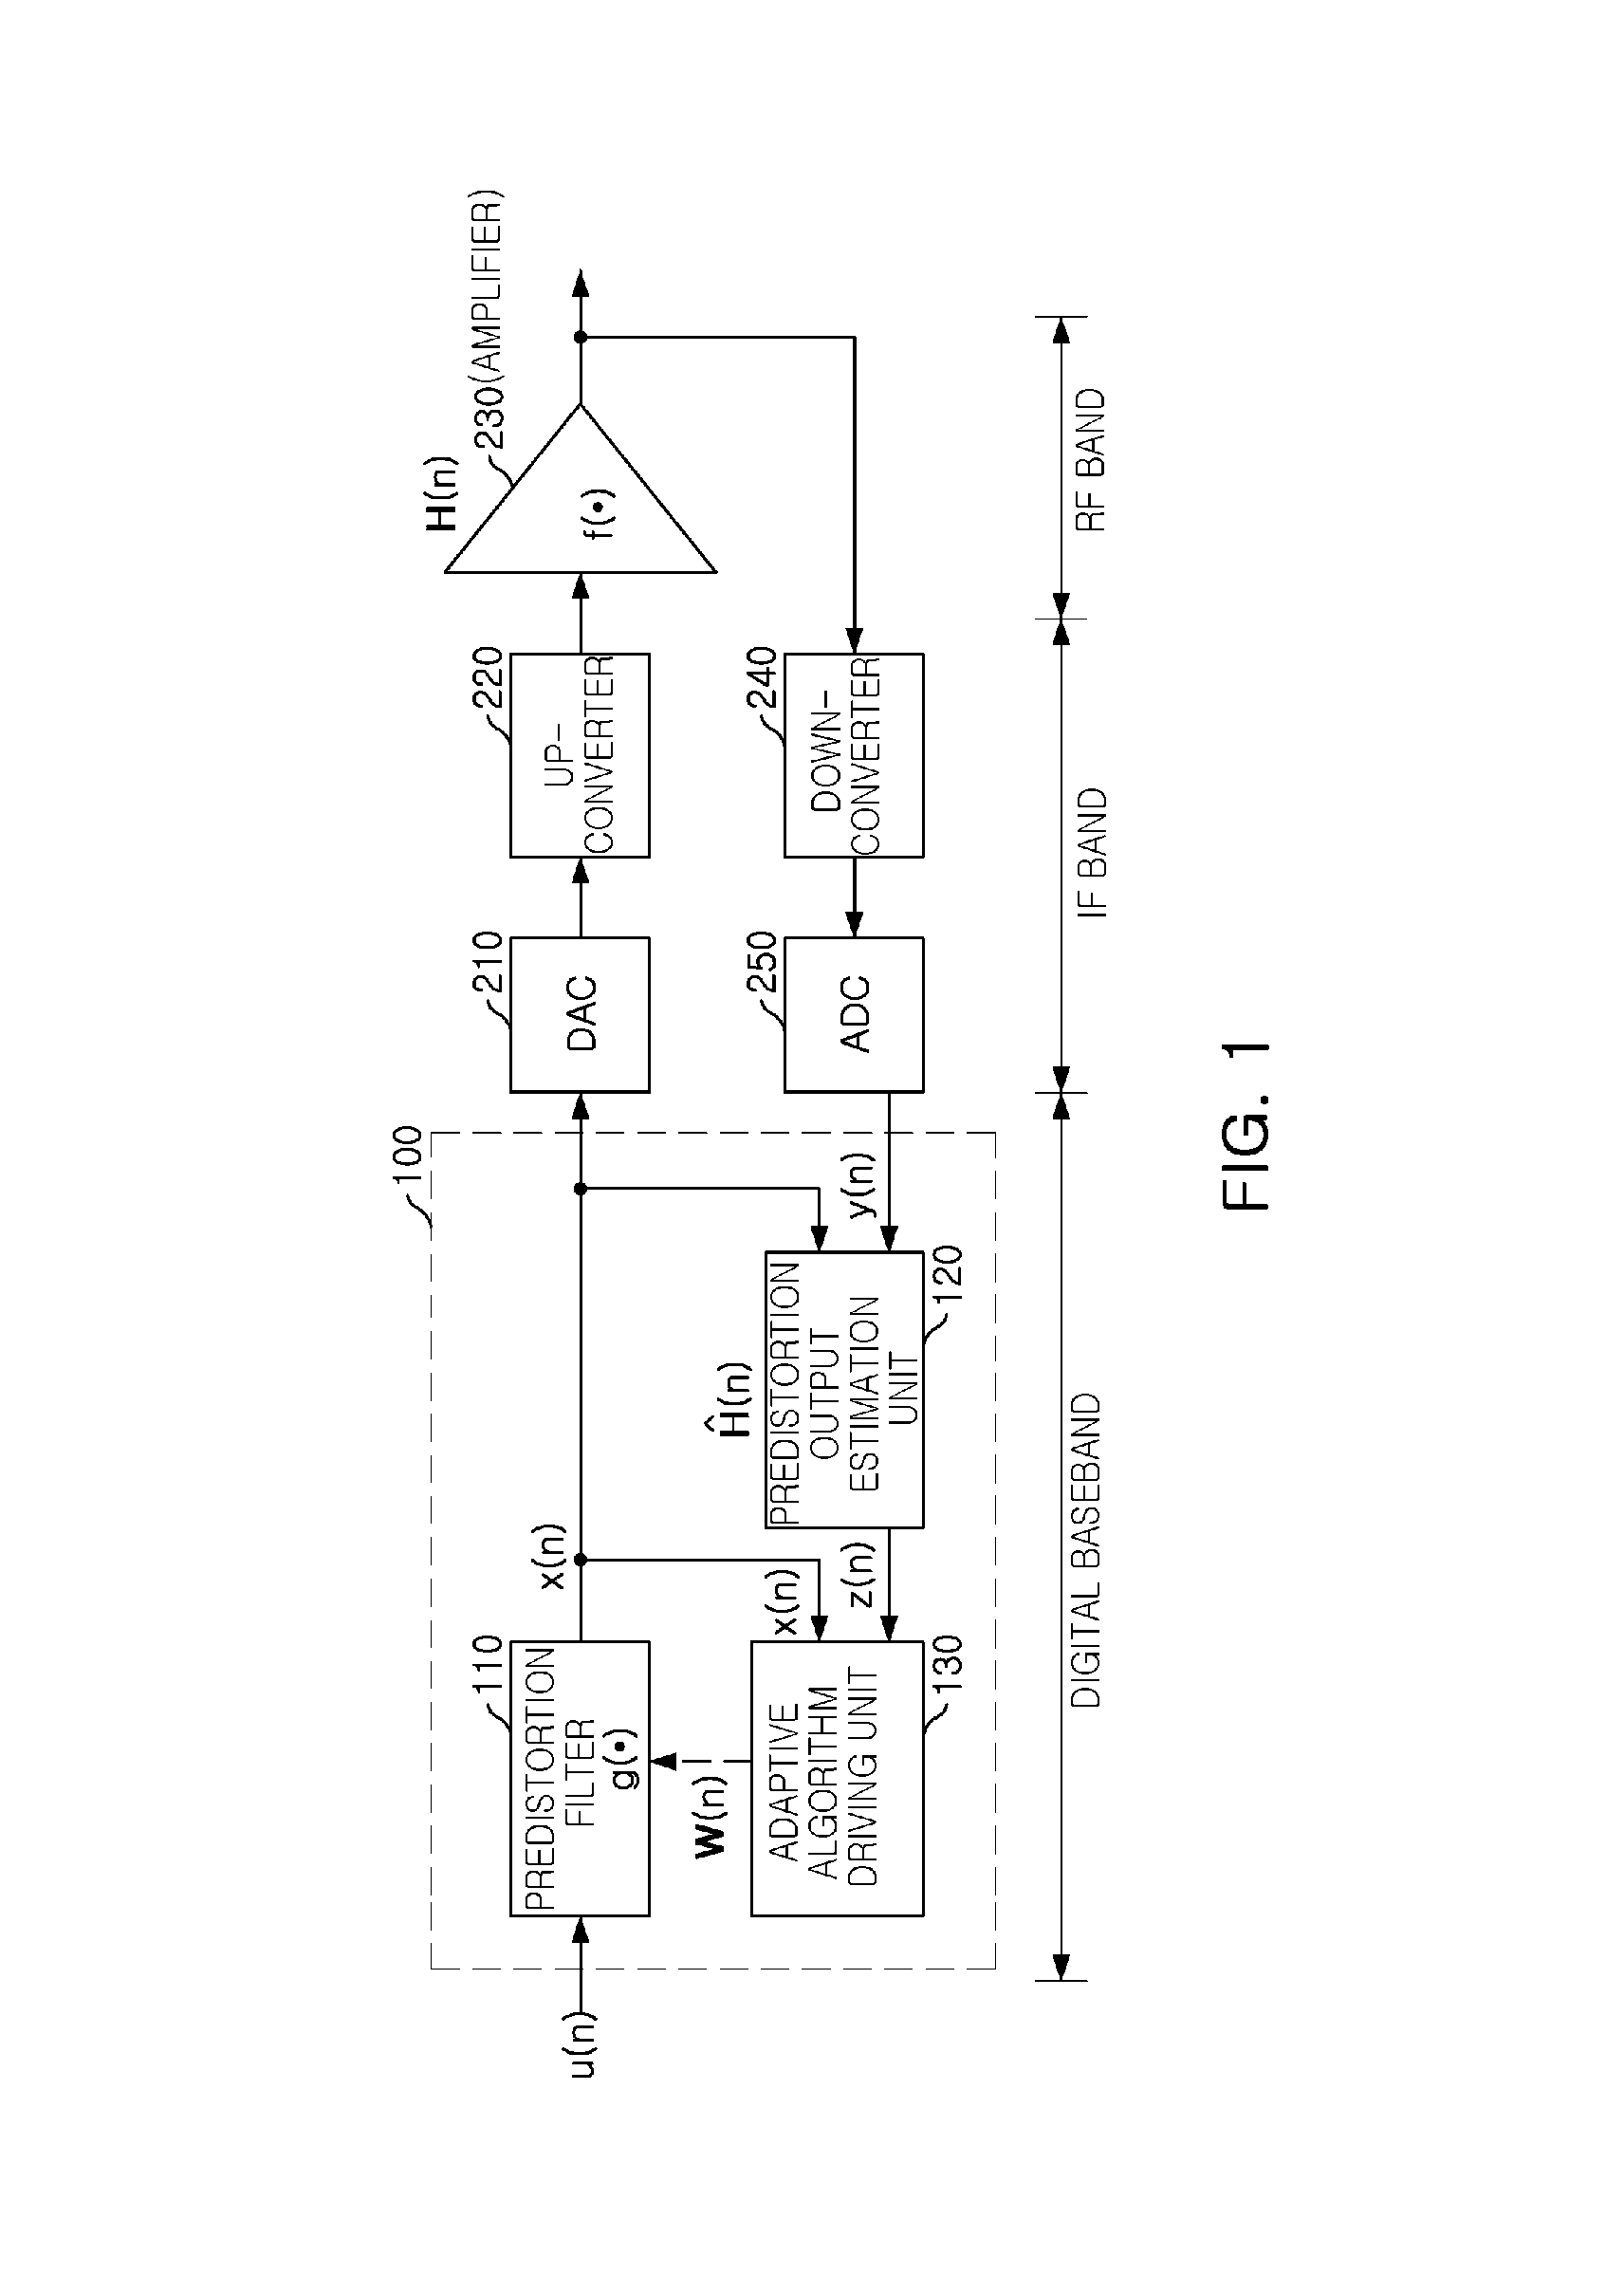 Predistorter for compensating for nonlinear distortion and method thereof